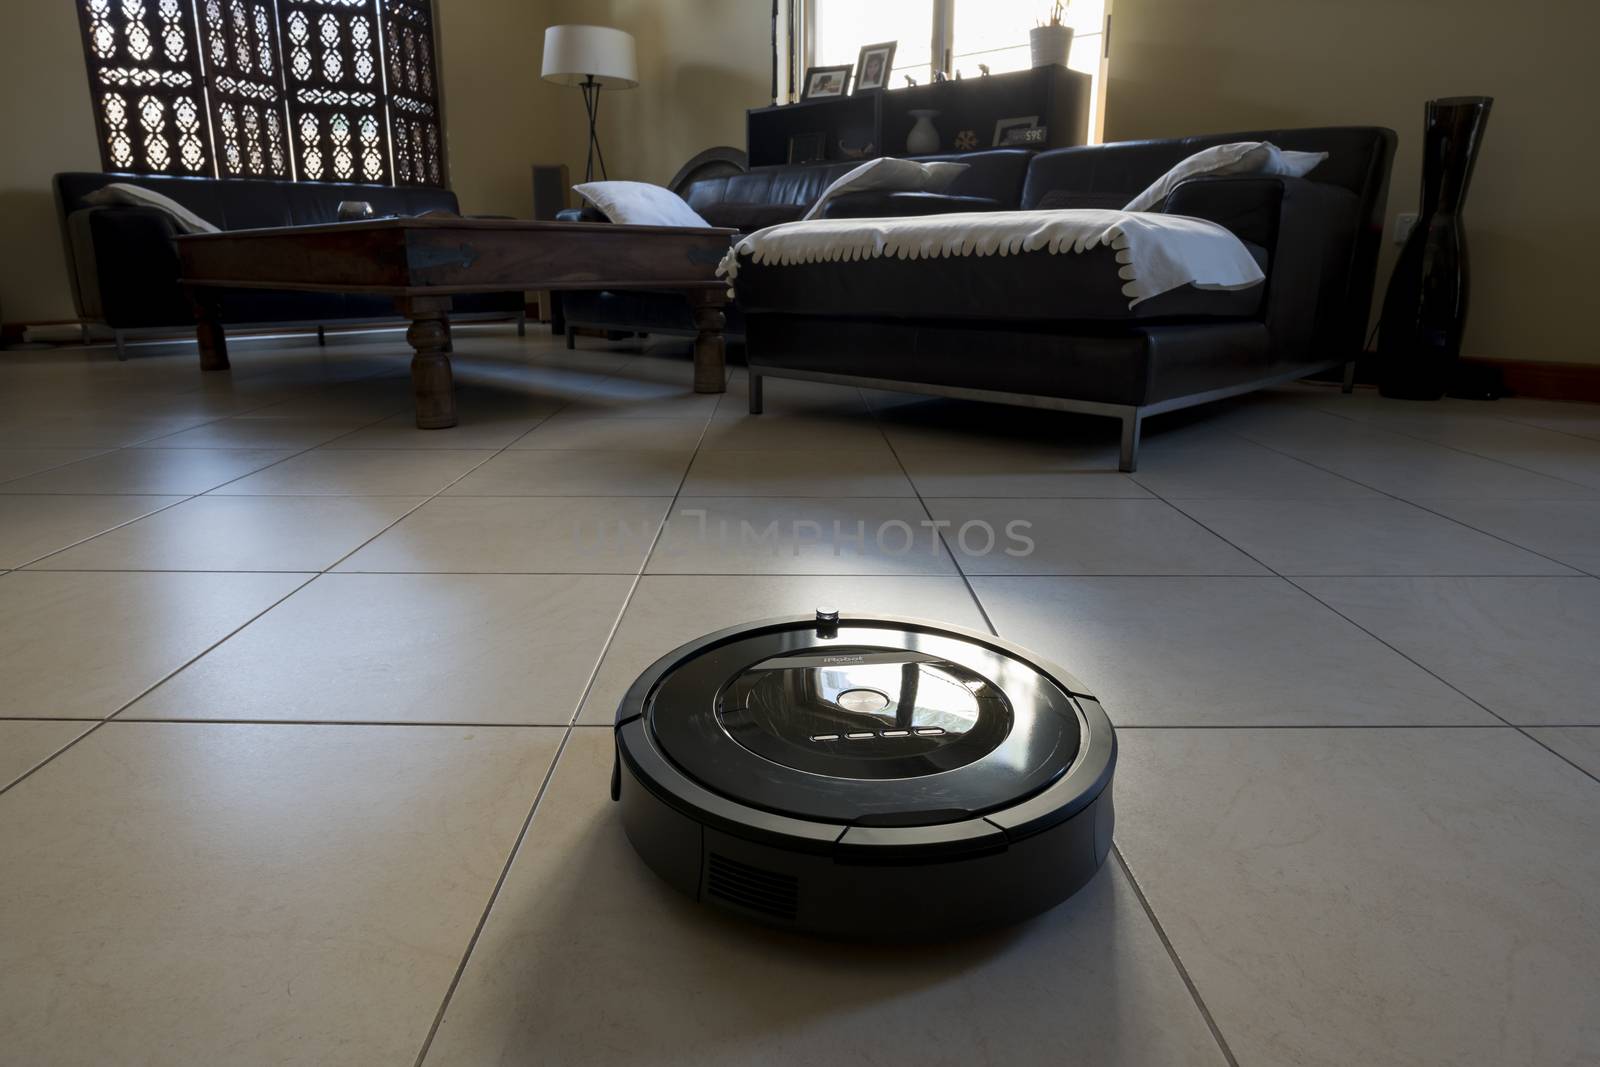 Roomba iRobot is an automated vacuum cleaning robot and powered by a rechargeable battery